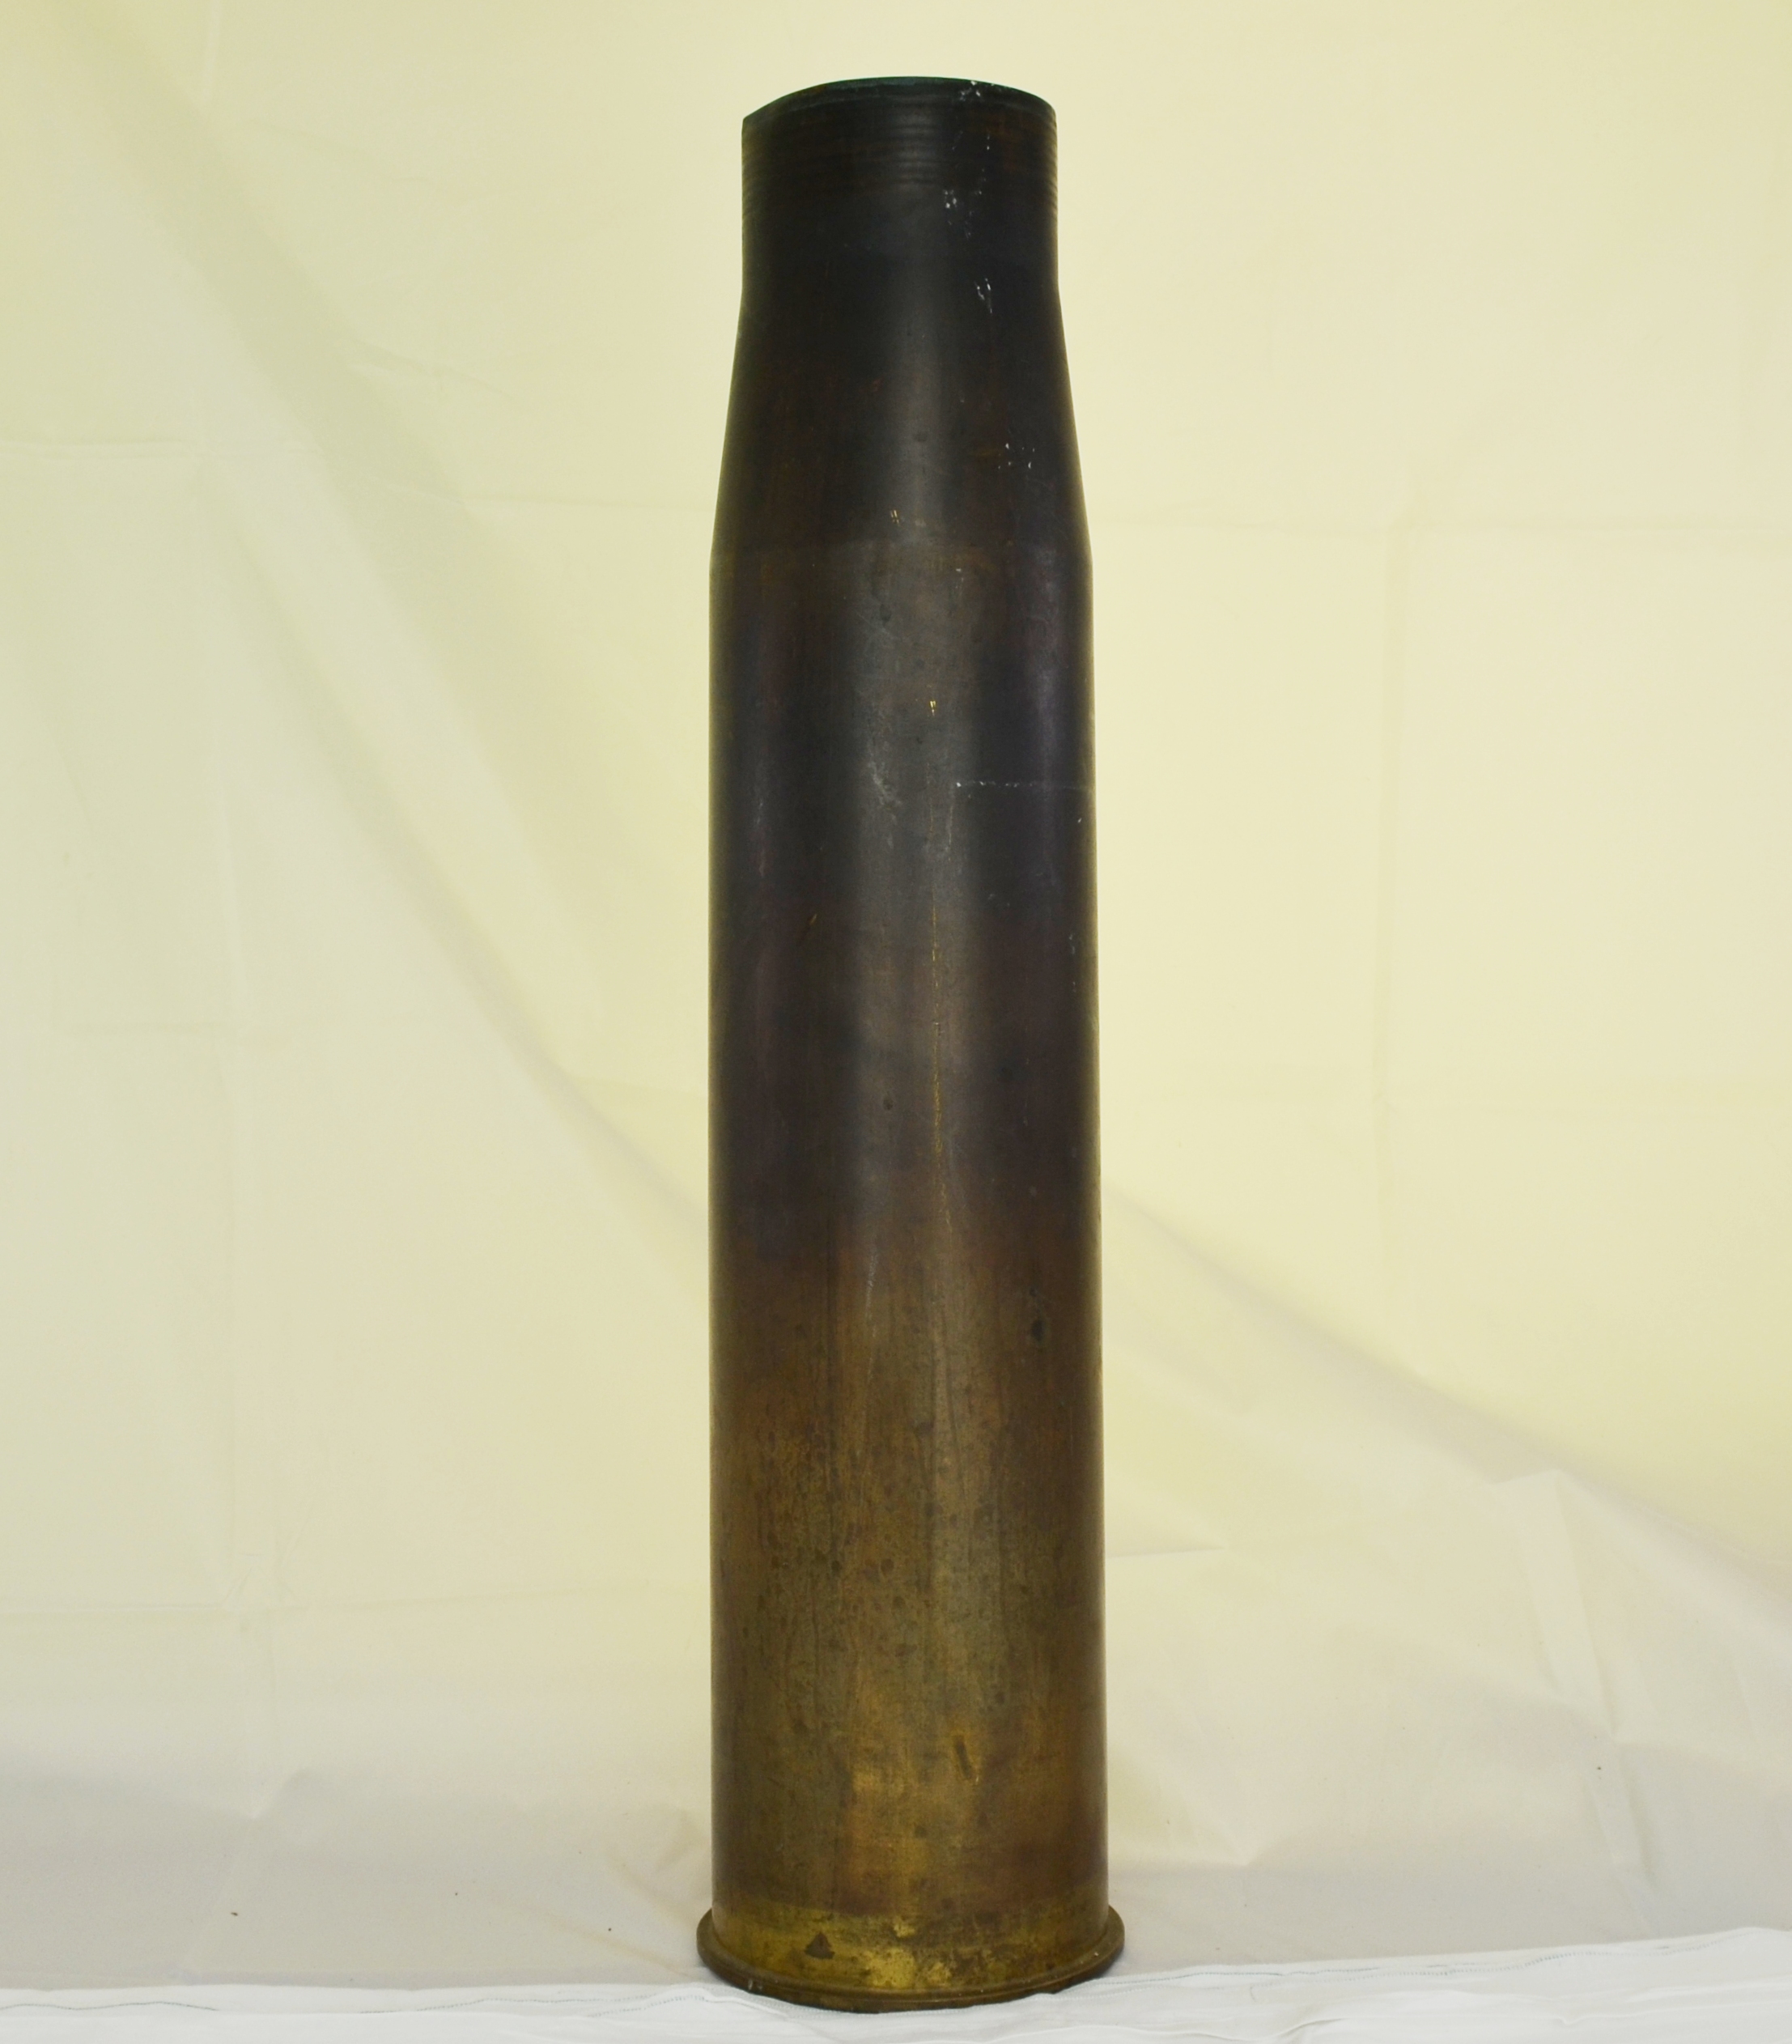 British 4.5 Inch Naval Artillery Brass Shell Case - Sally Antiques